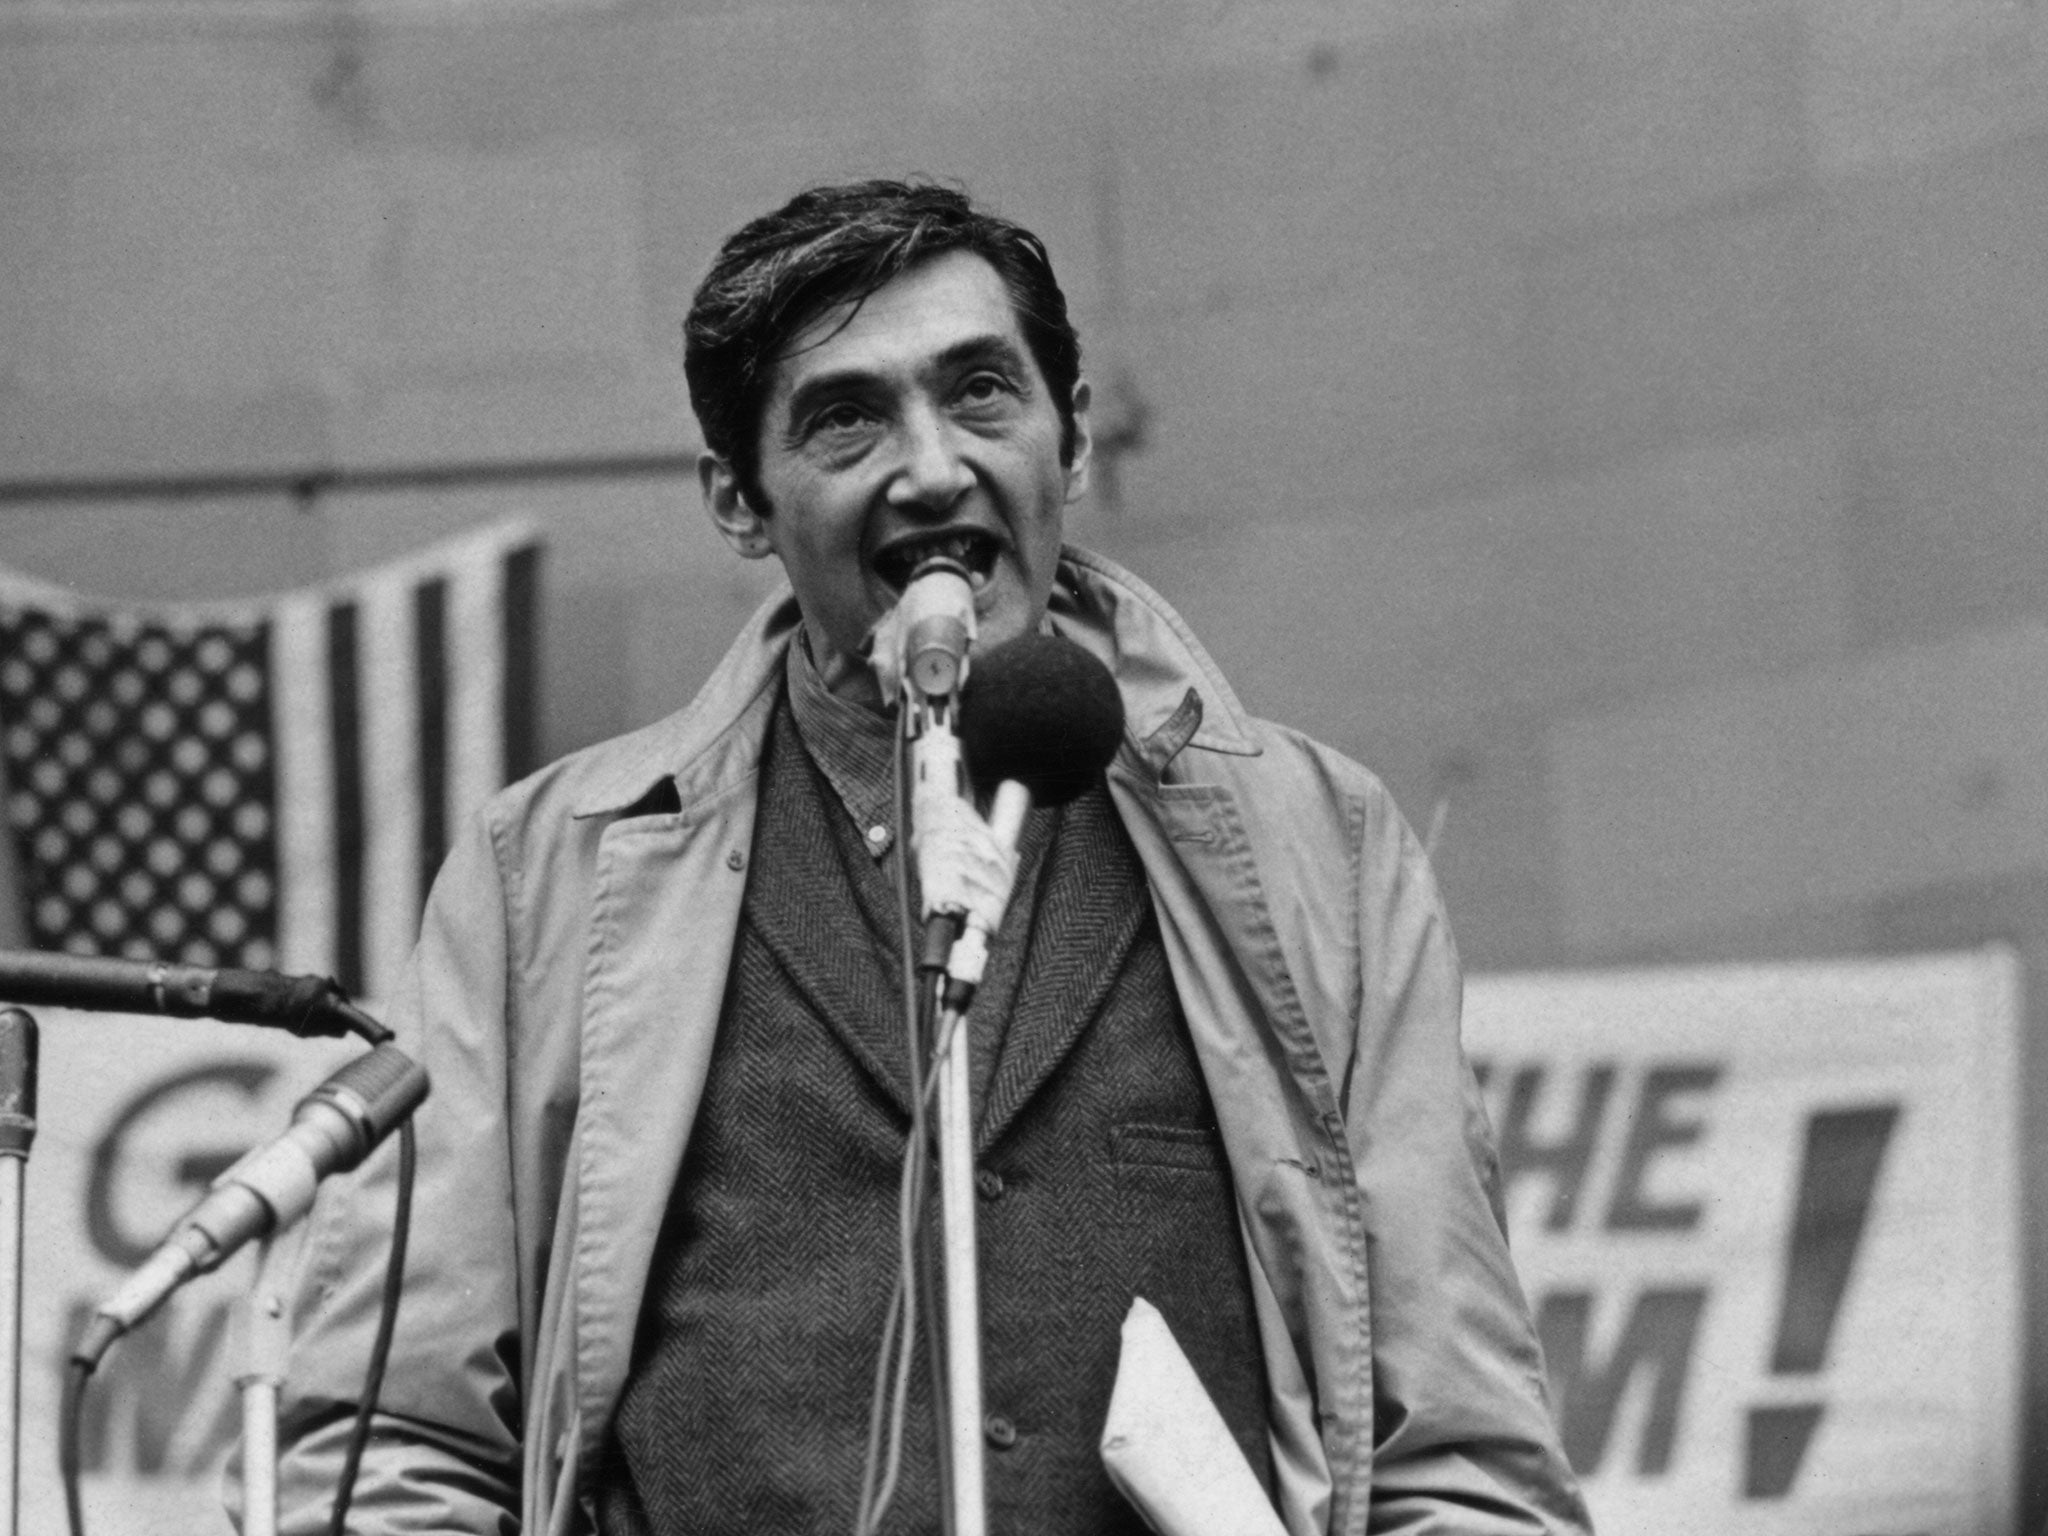 American peace activist and former priest Daniel J. Berrigan addresses the crowd at an anti-Vietnam War demonstration outside the 1968 Democratic National Convention, Chicago, Illinois, August 1968